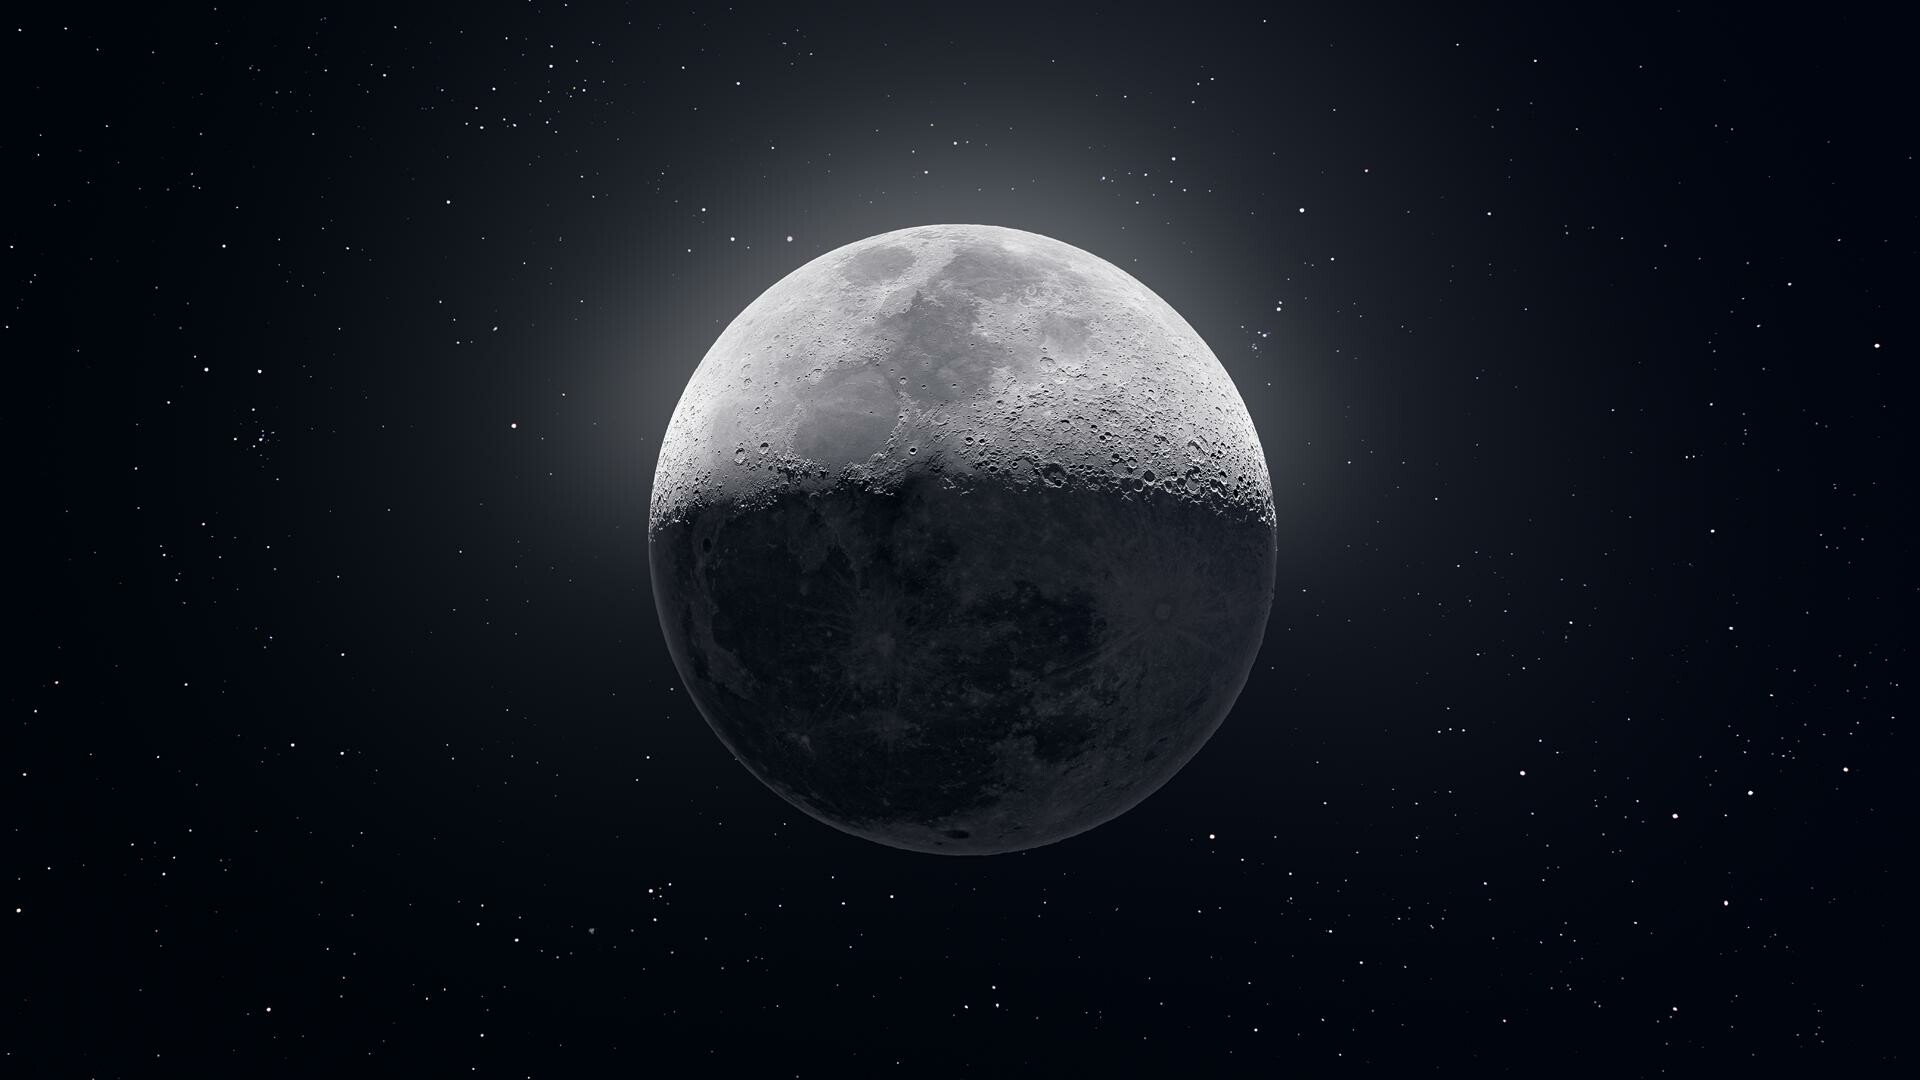 Moonlight: The Moon, Earth's sole natural satellite and nearest large celestial body. 1920x1080 Full HD Background.